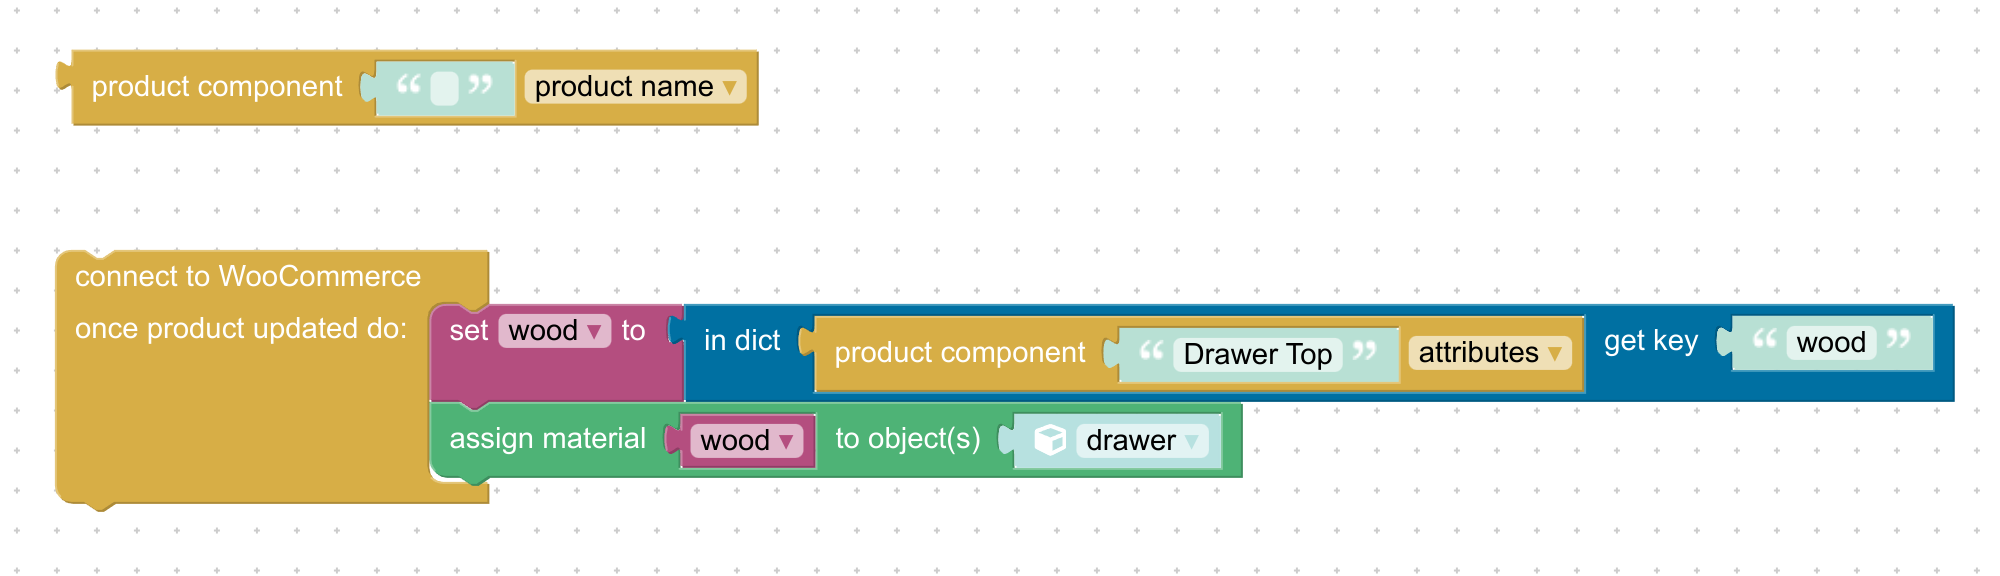 Visual programming block for getting WooCommerce composite product components